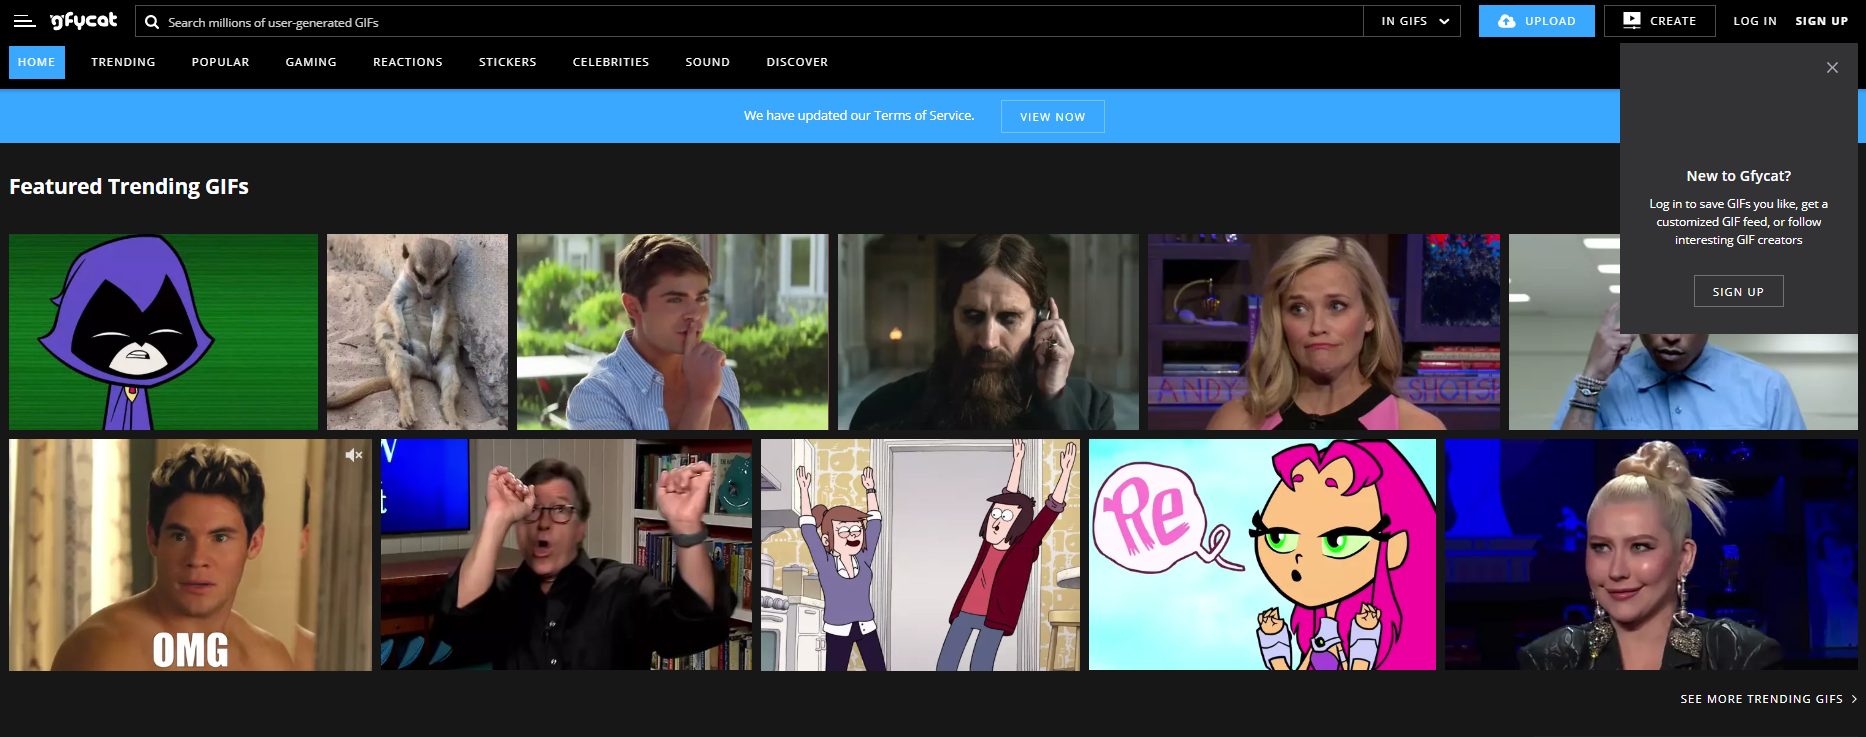 9 Websites to Visit for Amazing GIFs